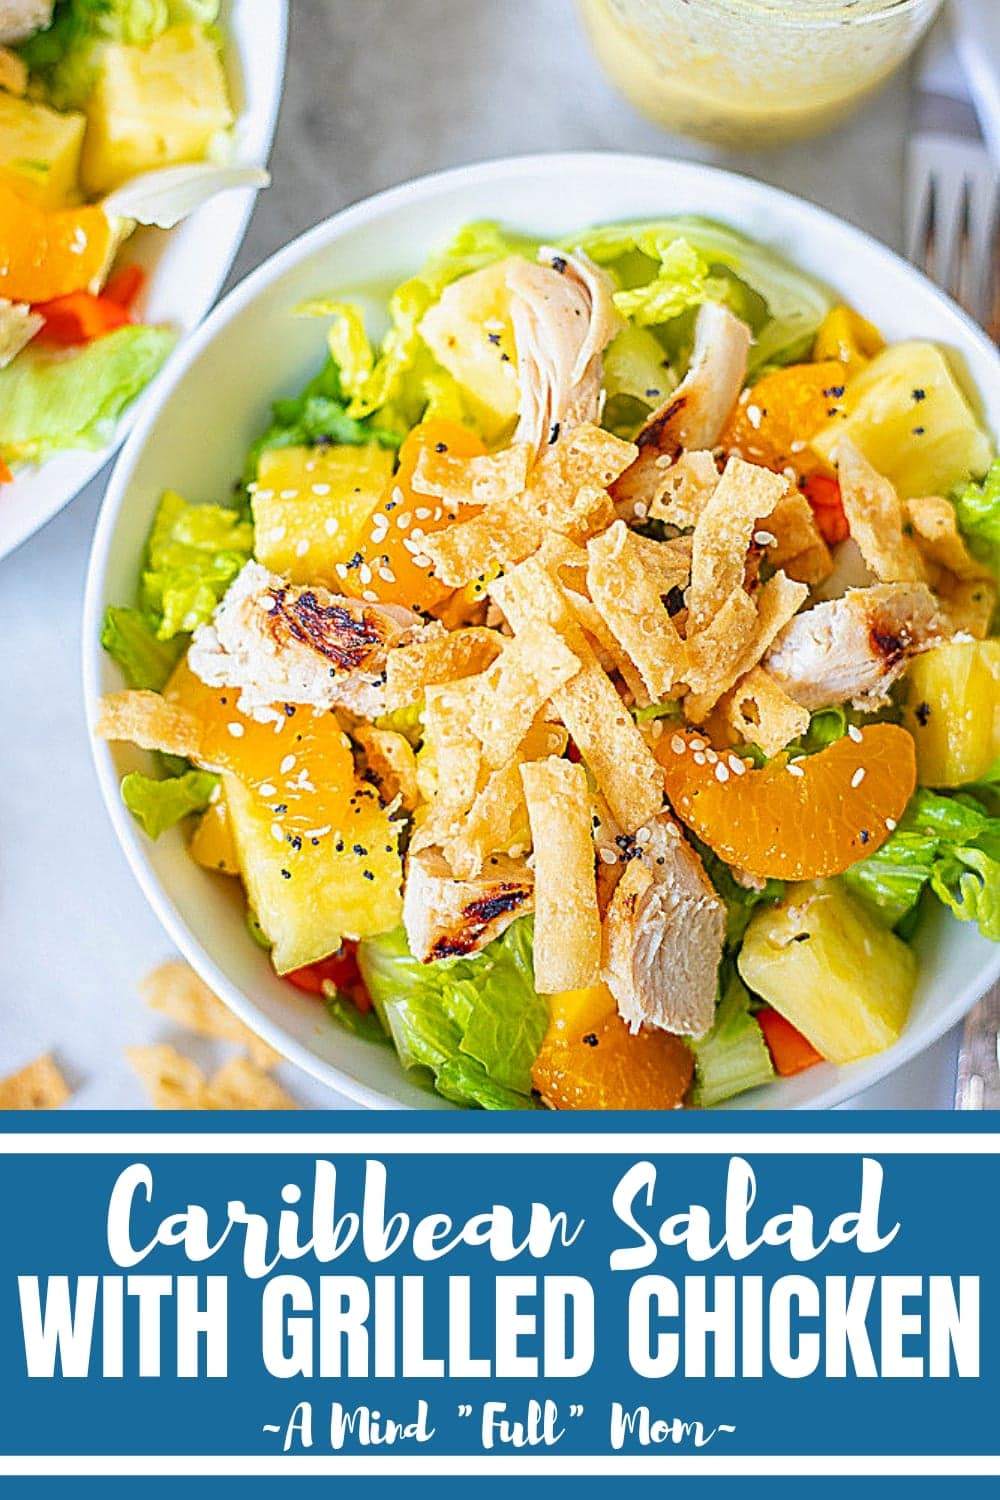 This easy Caribbean Salad is made with grilled chicken, fresh fruit, leafy greens, and a bright orange vinaigrette for a fresh and healthy salad that is reminiscent of Cheesecake Factory's Luau Salad. This chicken salad is incredibly light and flavorful and really easy to prepare.